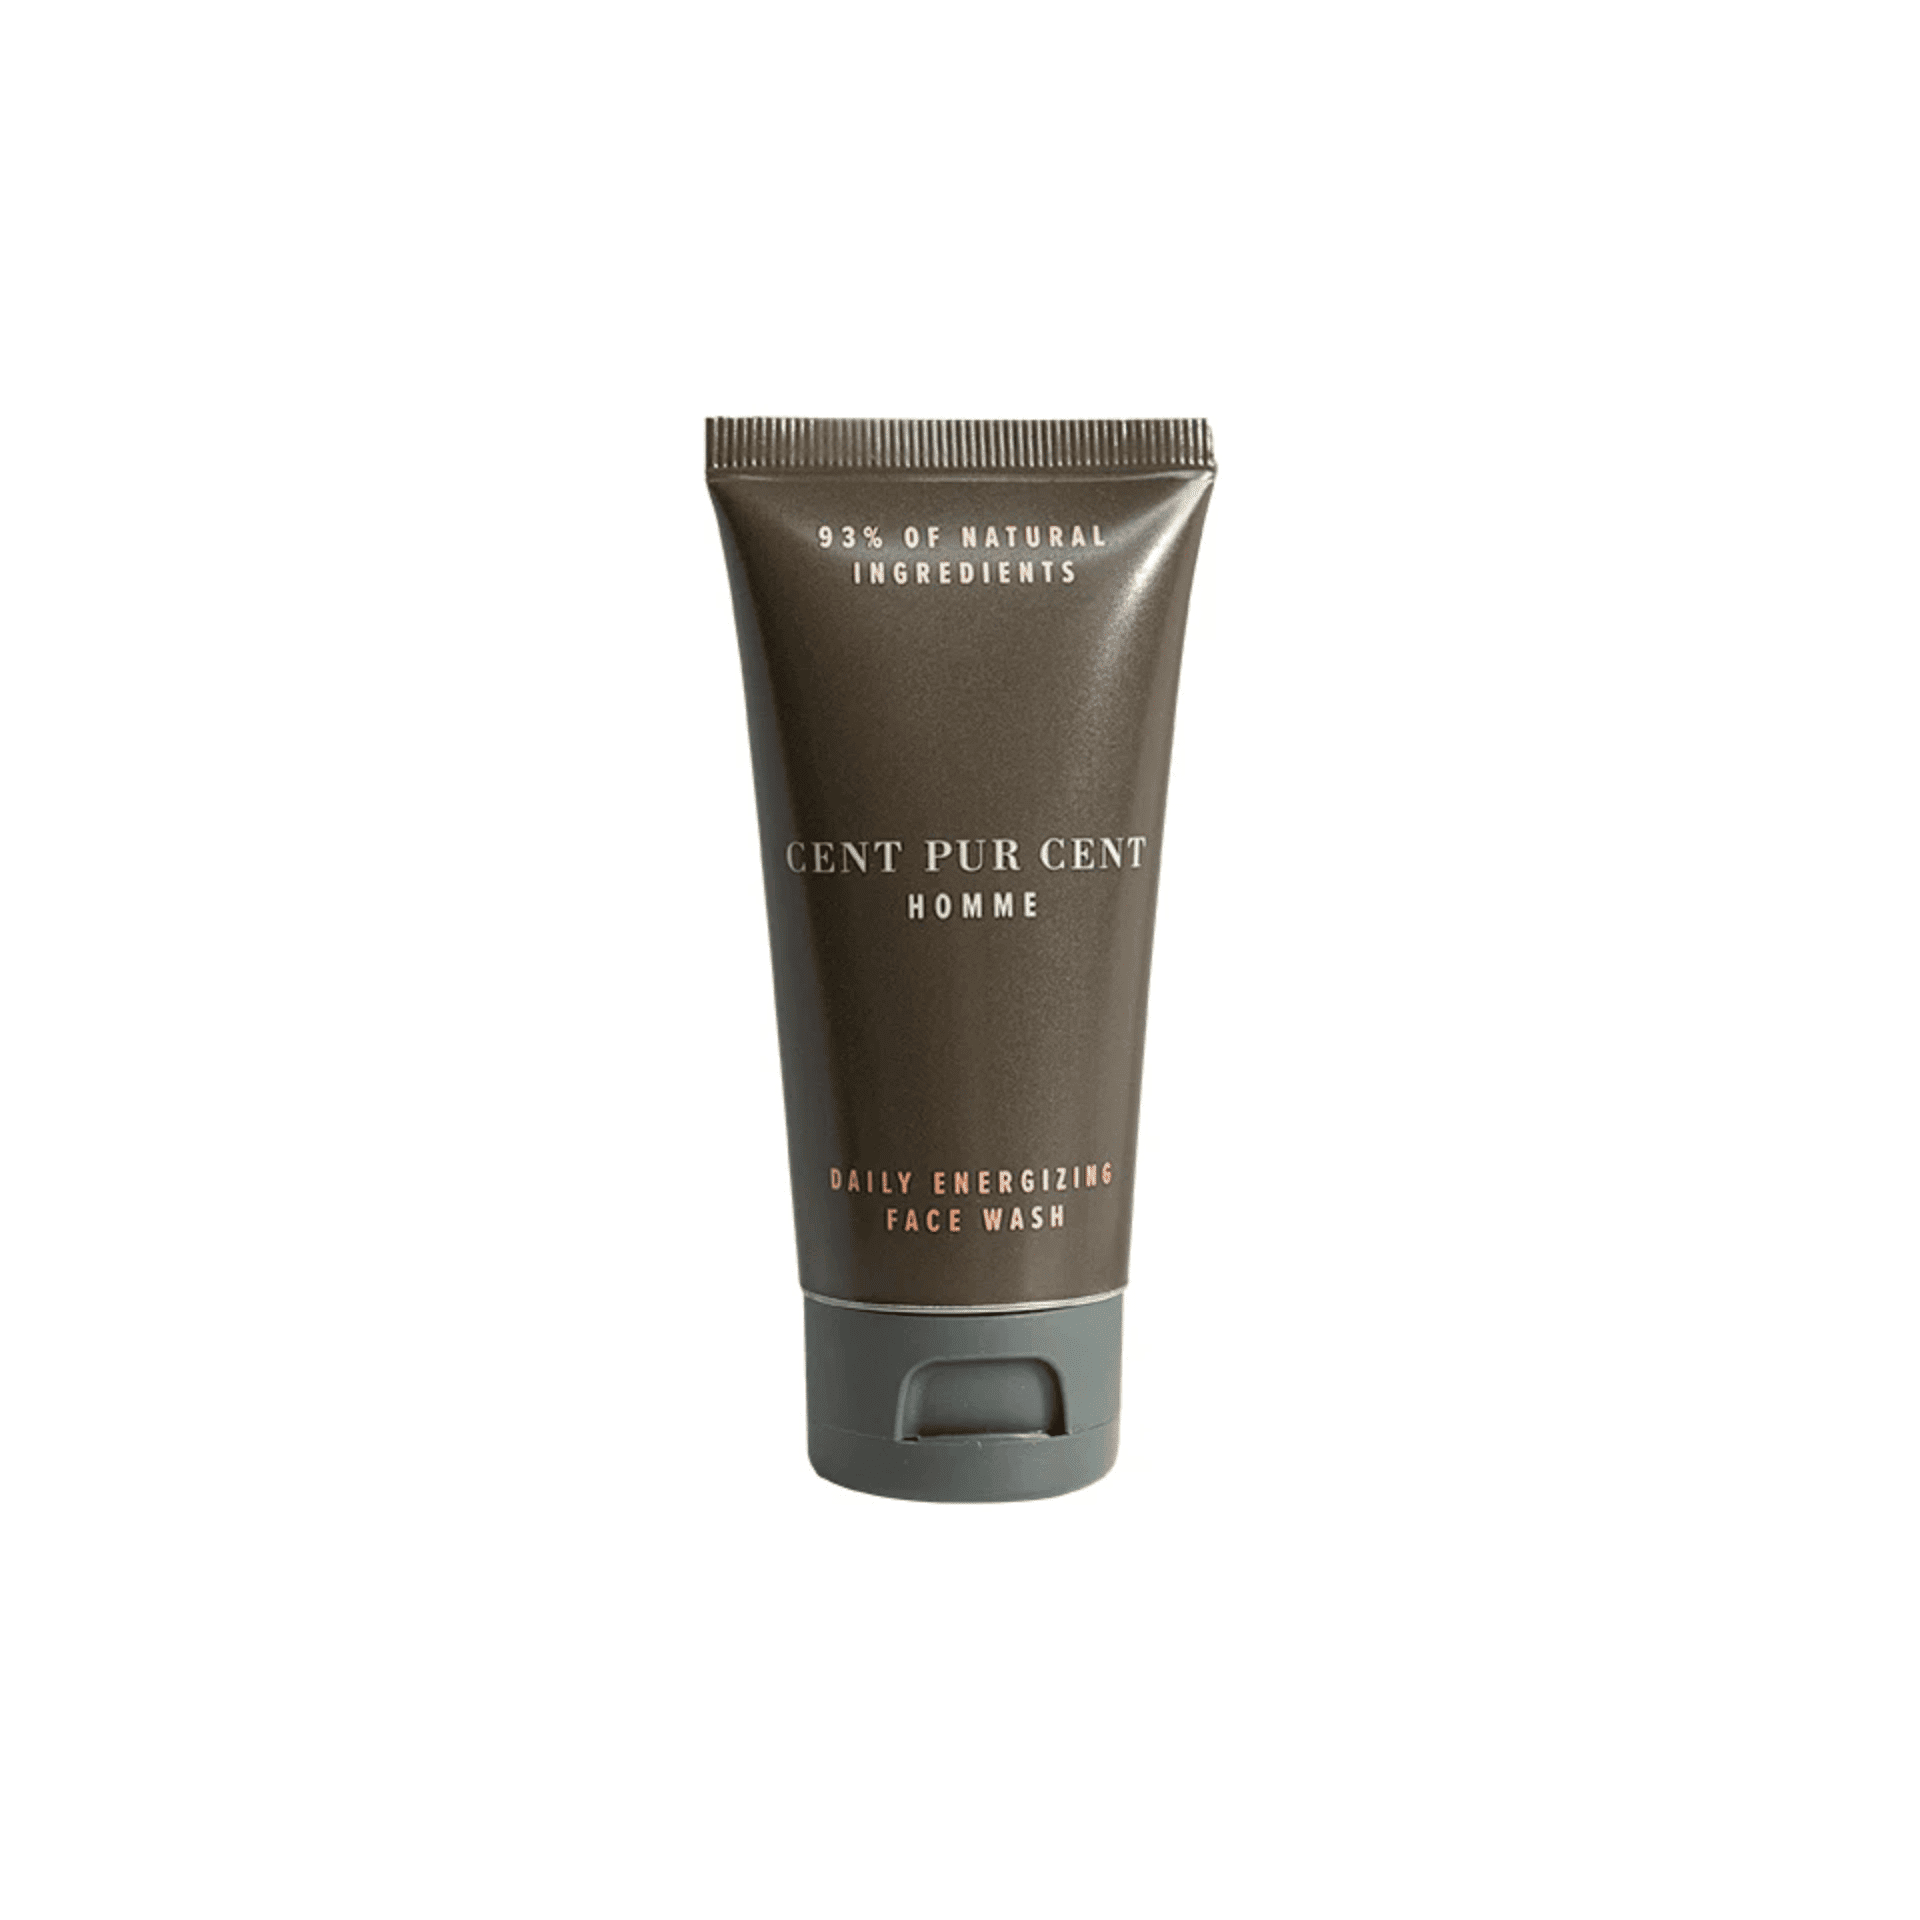 Cent Pur Cent Homme Daily Energizing Face Wash Mini